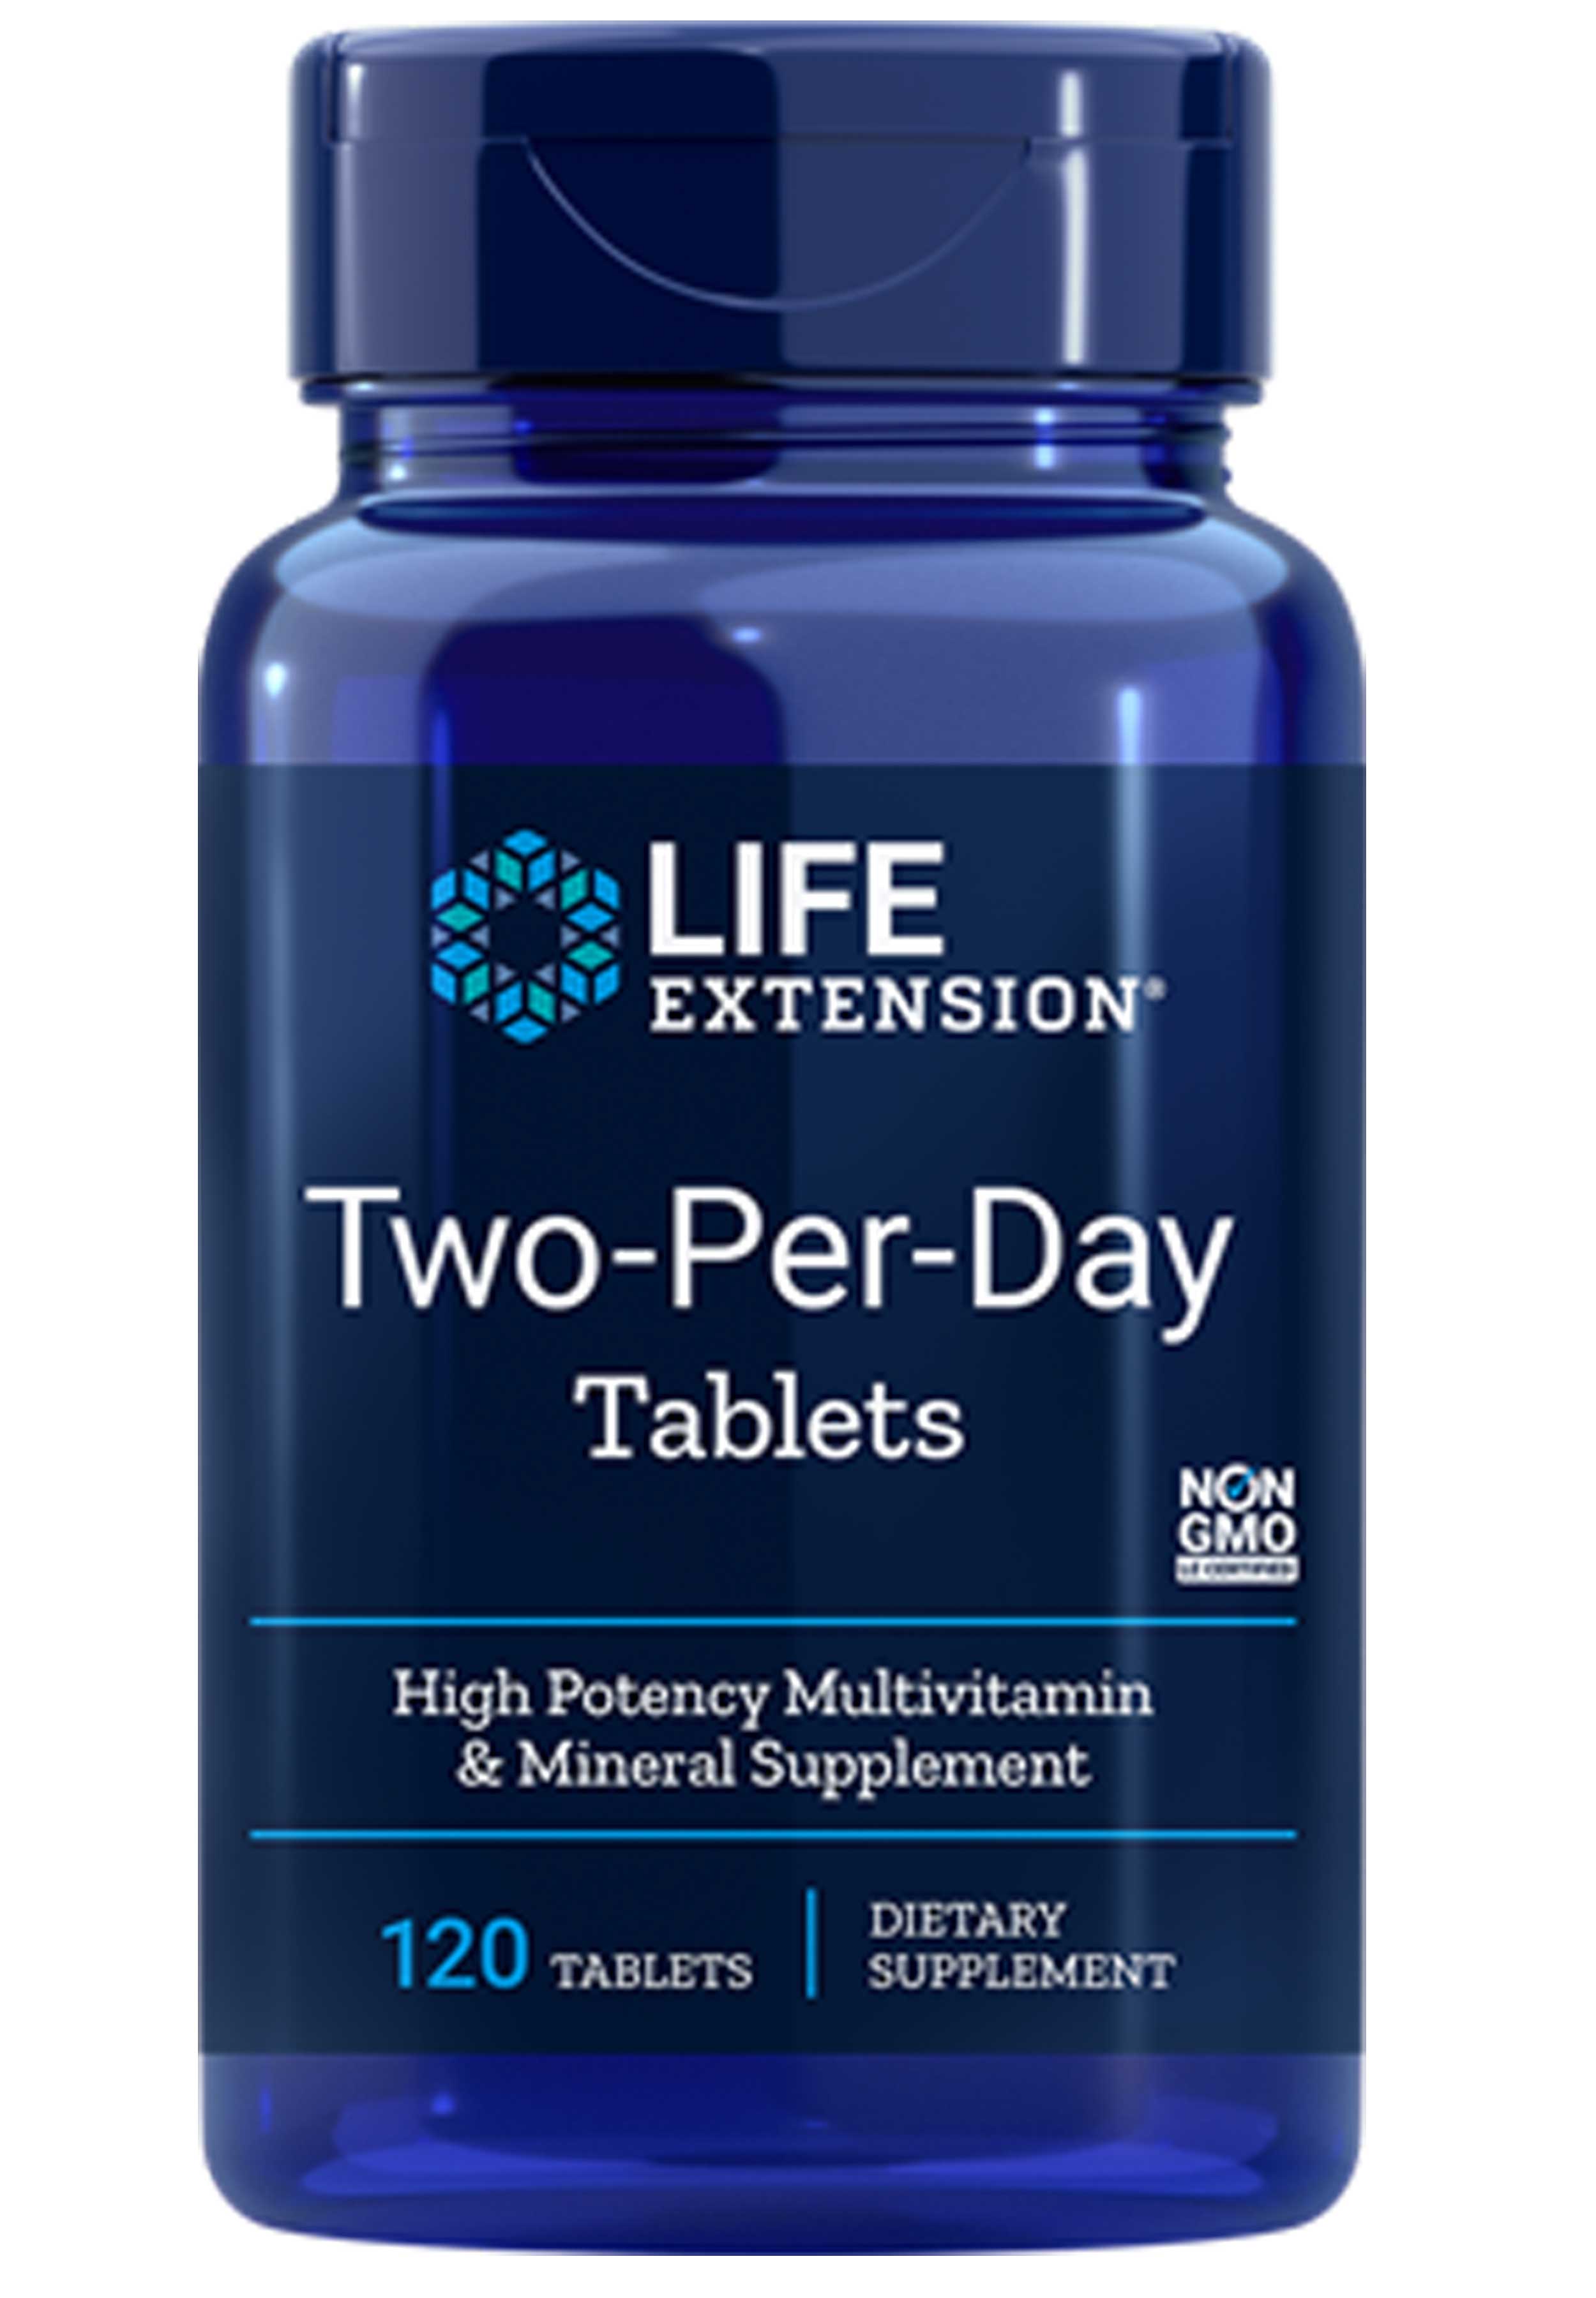 Life Extension Two-Per-Day